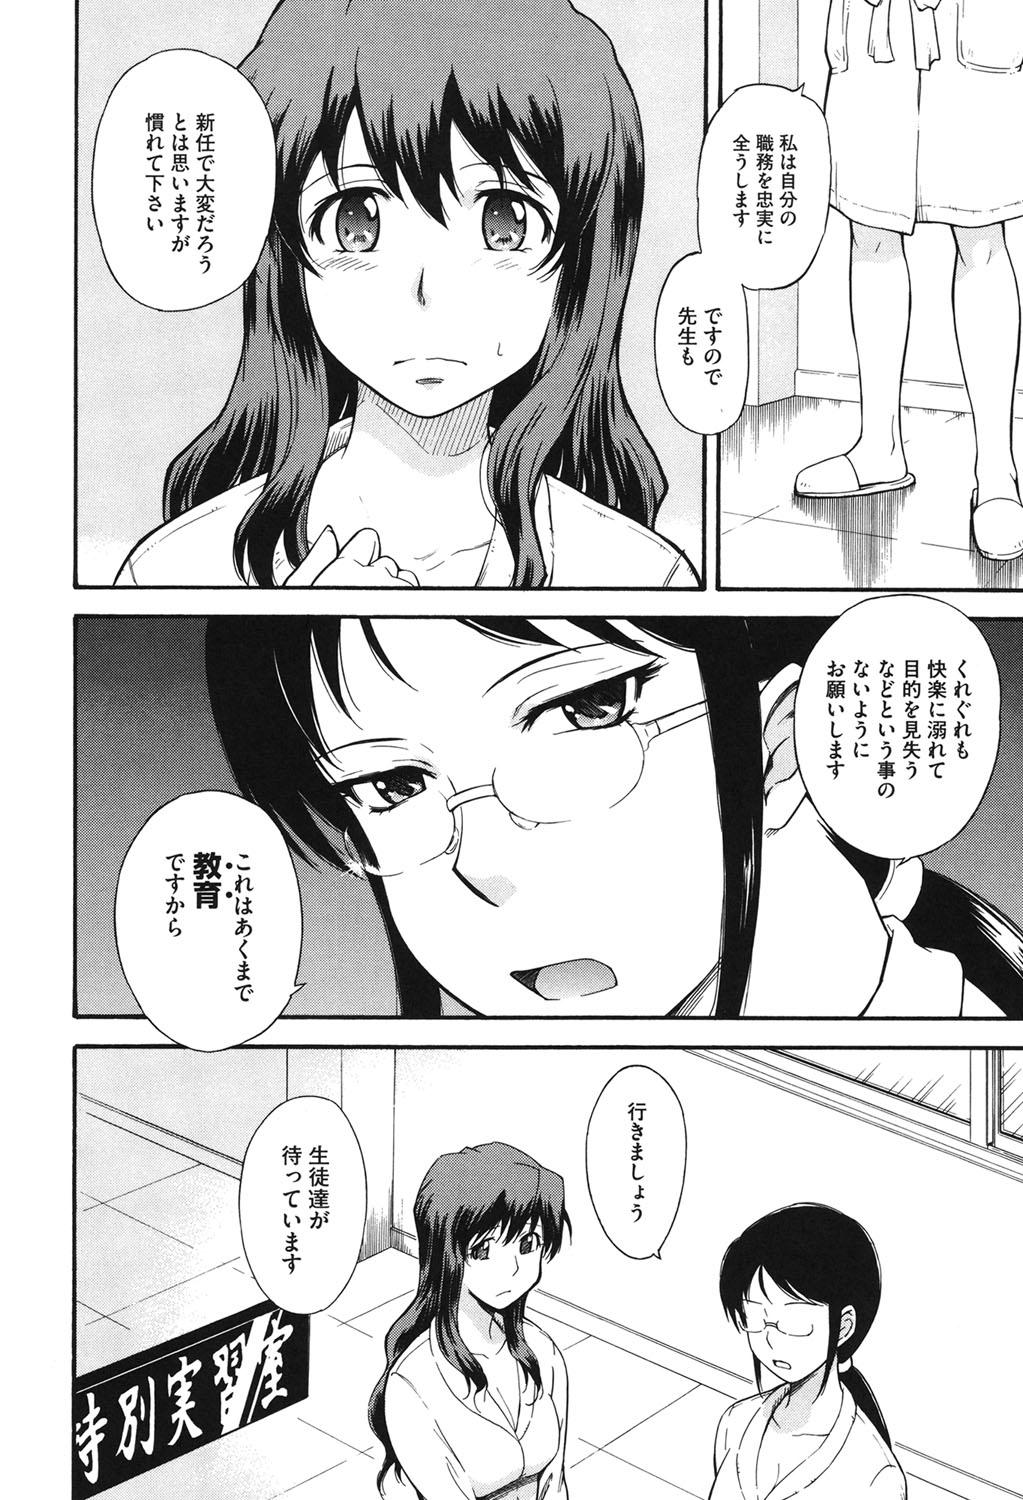 Home Core Colle Vol. 3 Onna Kyoushi Hen Deepthroat - Page 7